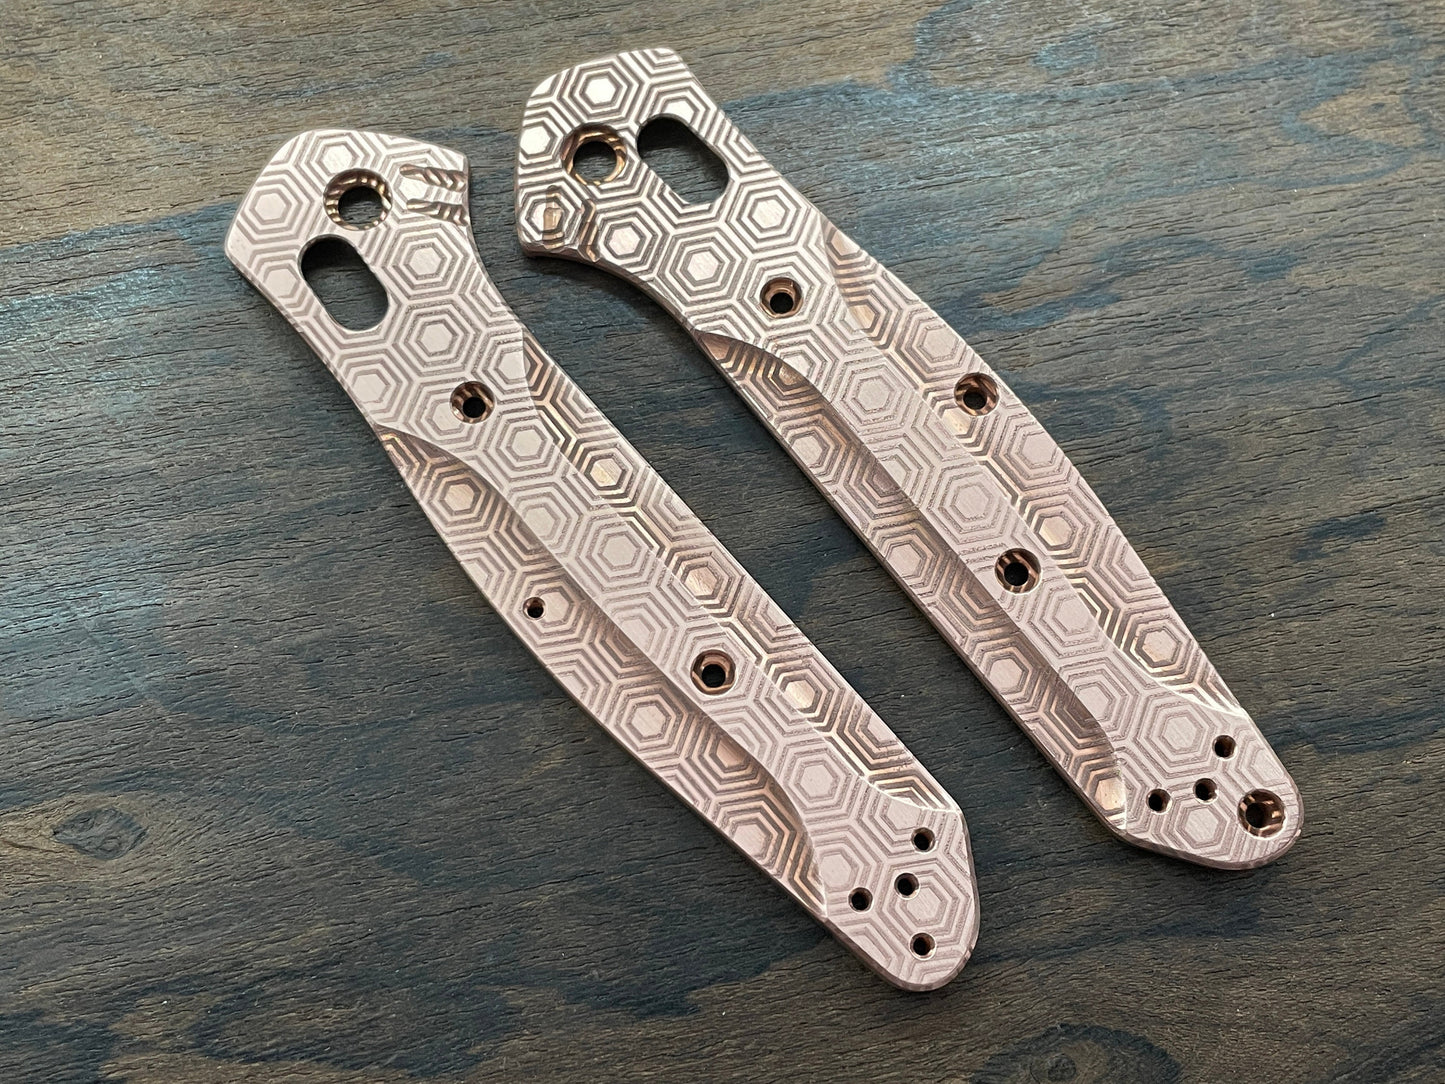 HONEYCOMB engraved Copper Scales for Benchmade 940 Osborne